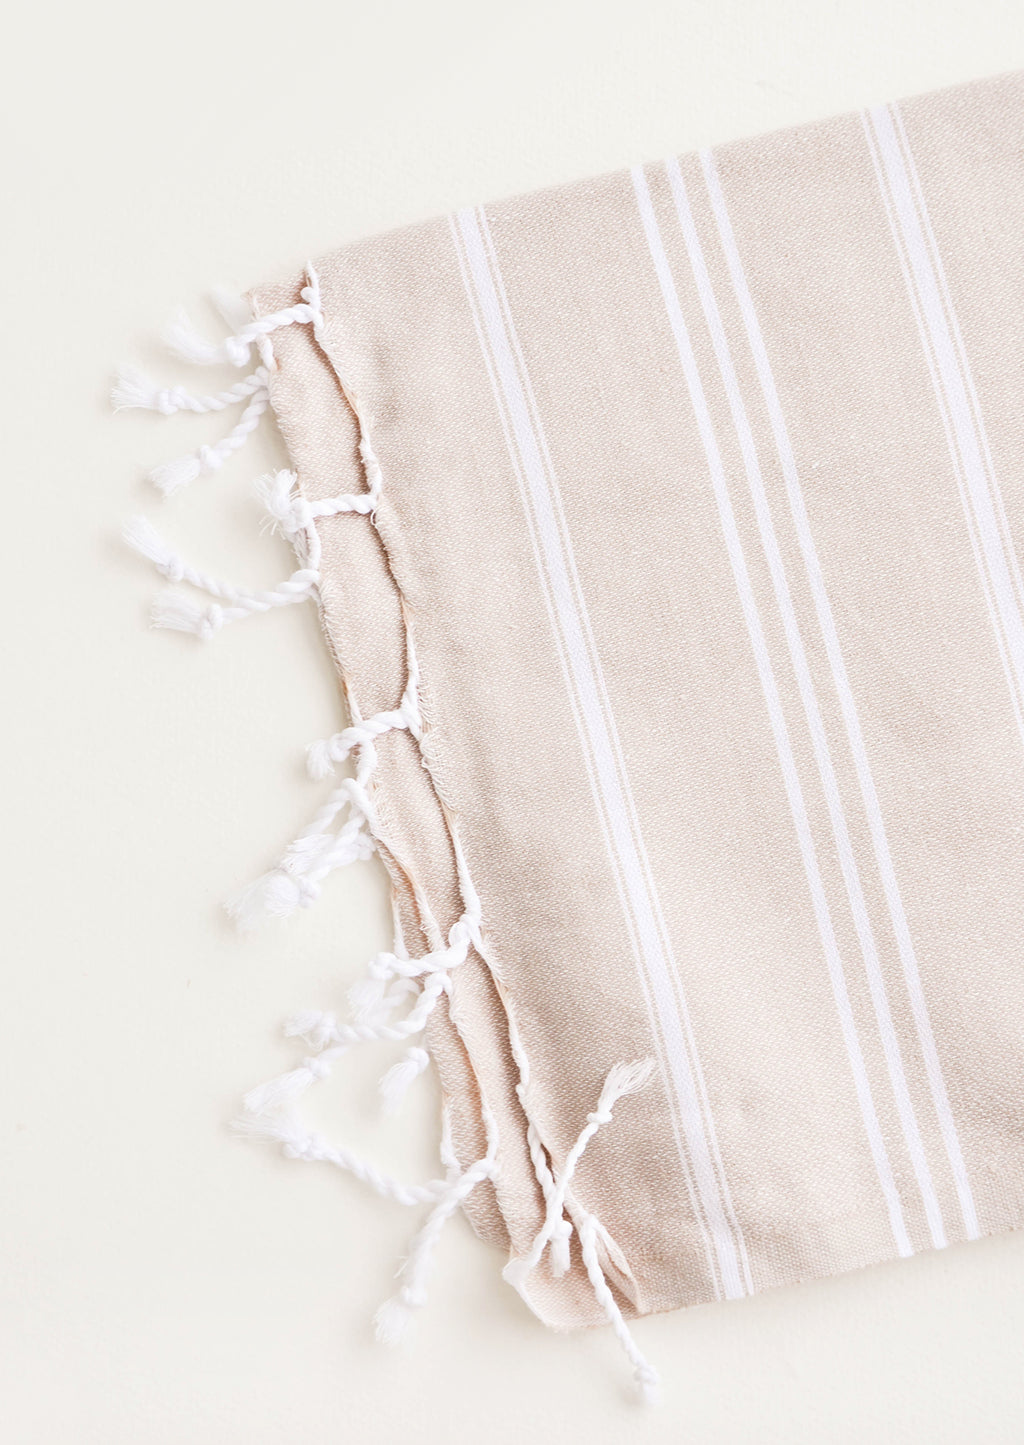 Tan / Hand Towel: Cotton towel with white stripes in tan, twisted fringe on ends